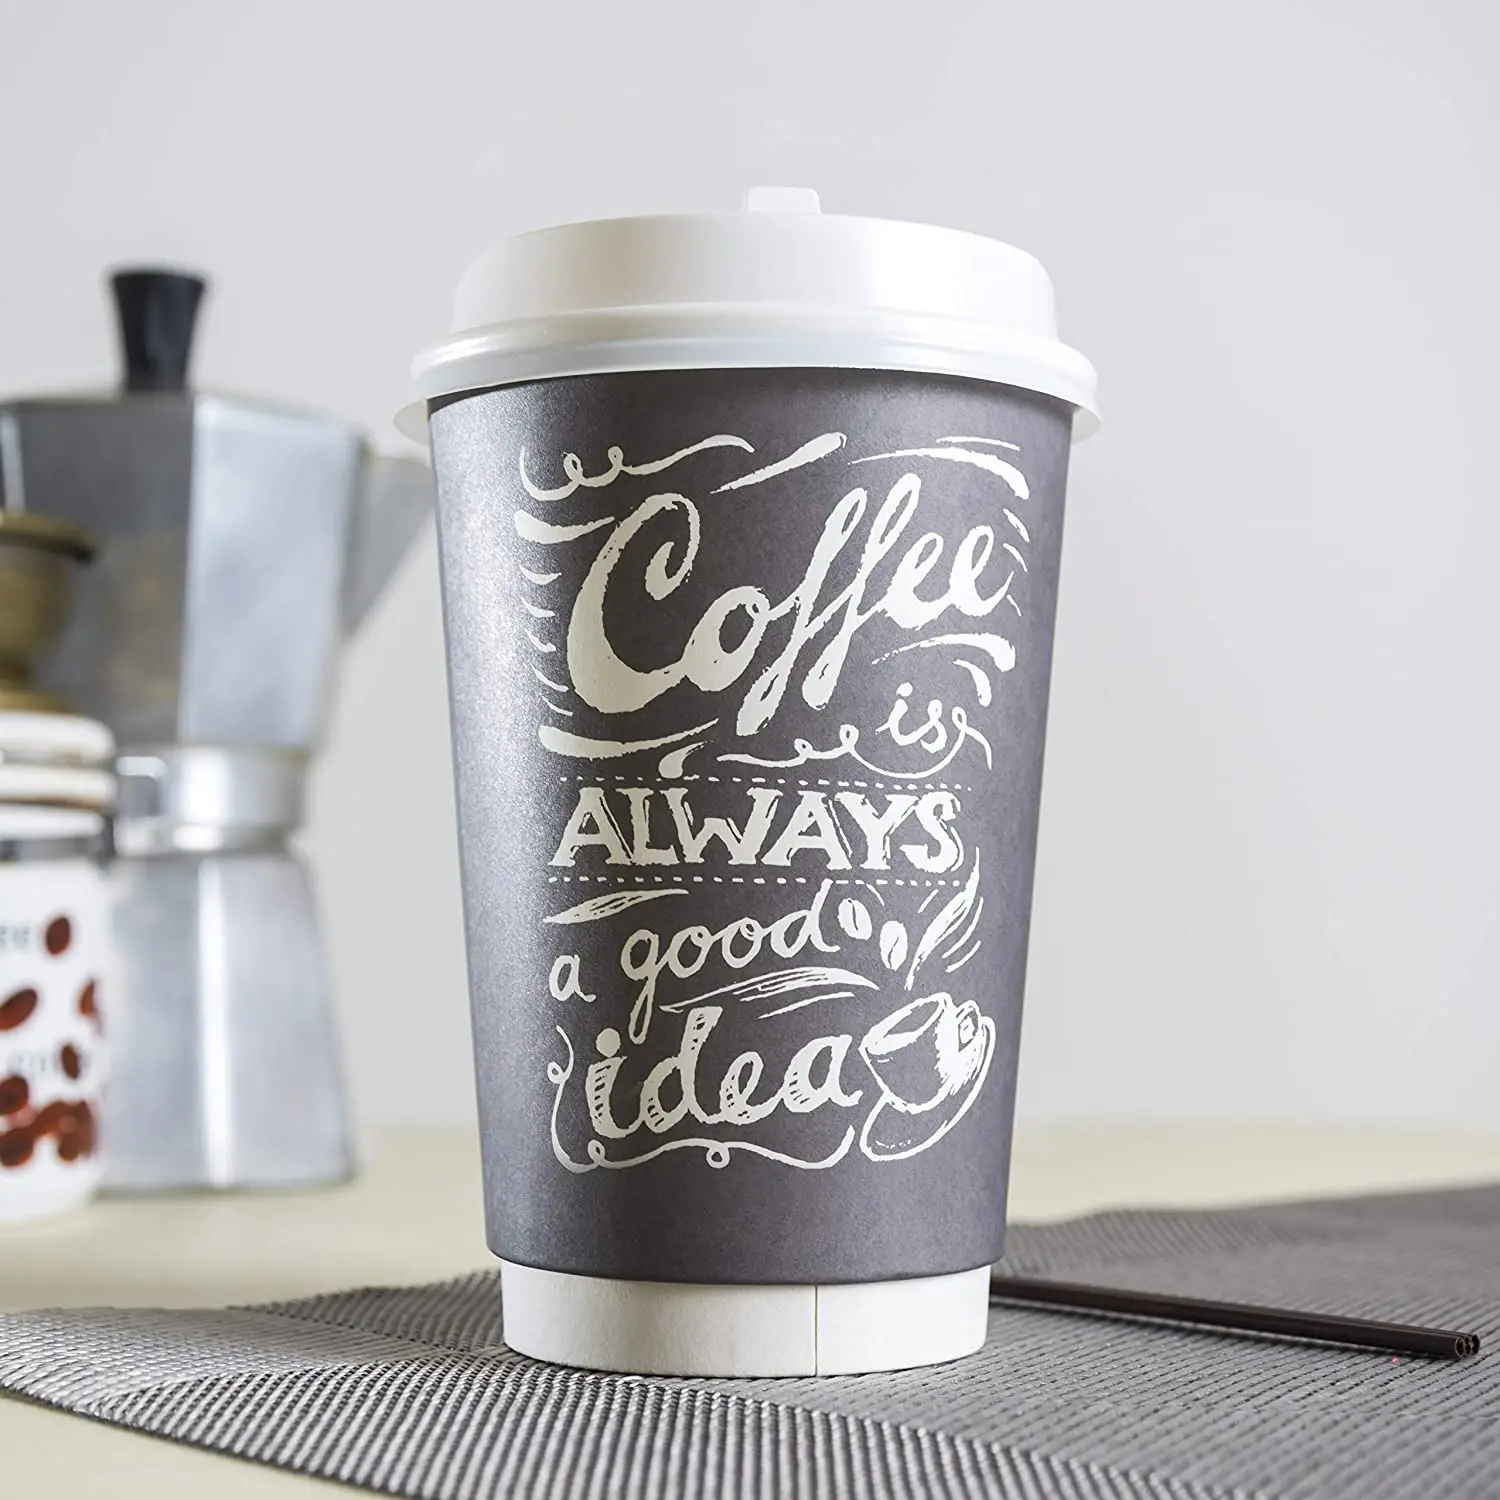 

Best gobelet en papier Round biodegradable 12 16 oz paper cups Hot Drink double wall paper coffee cup for soda water